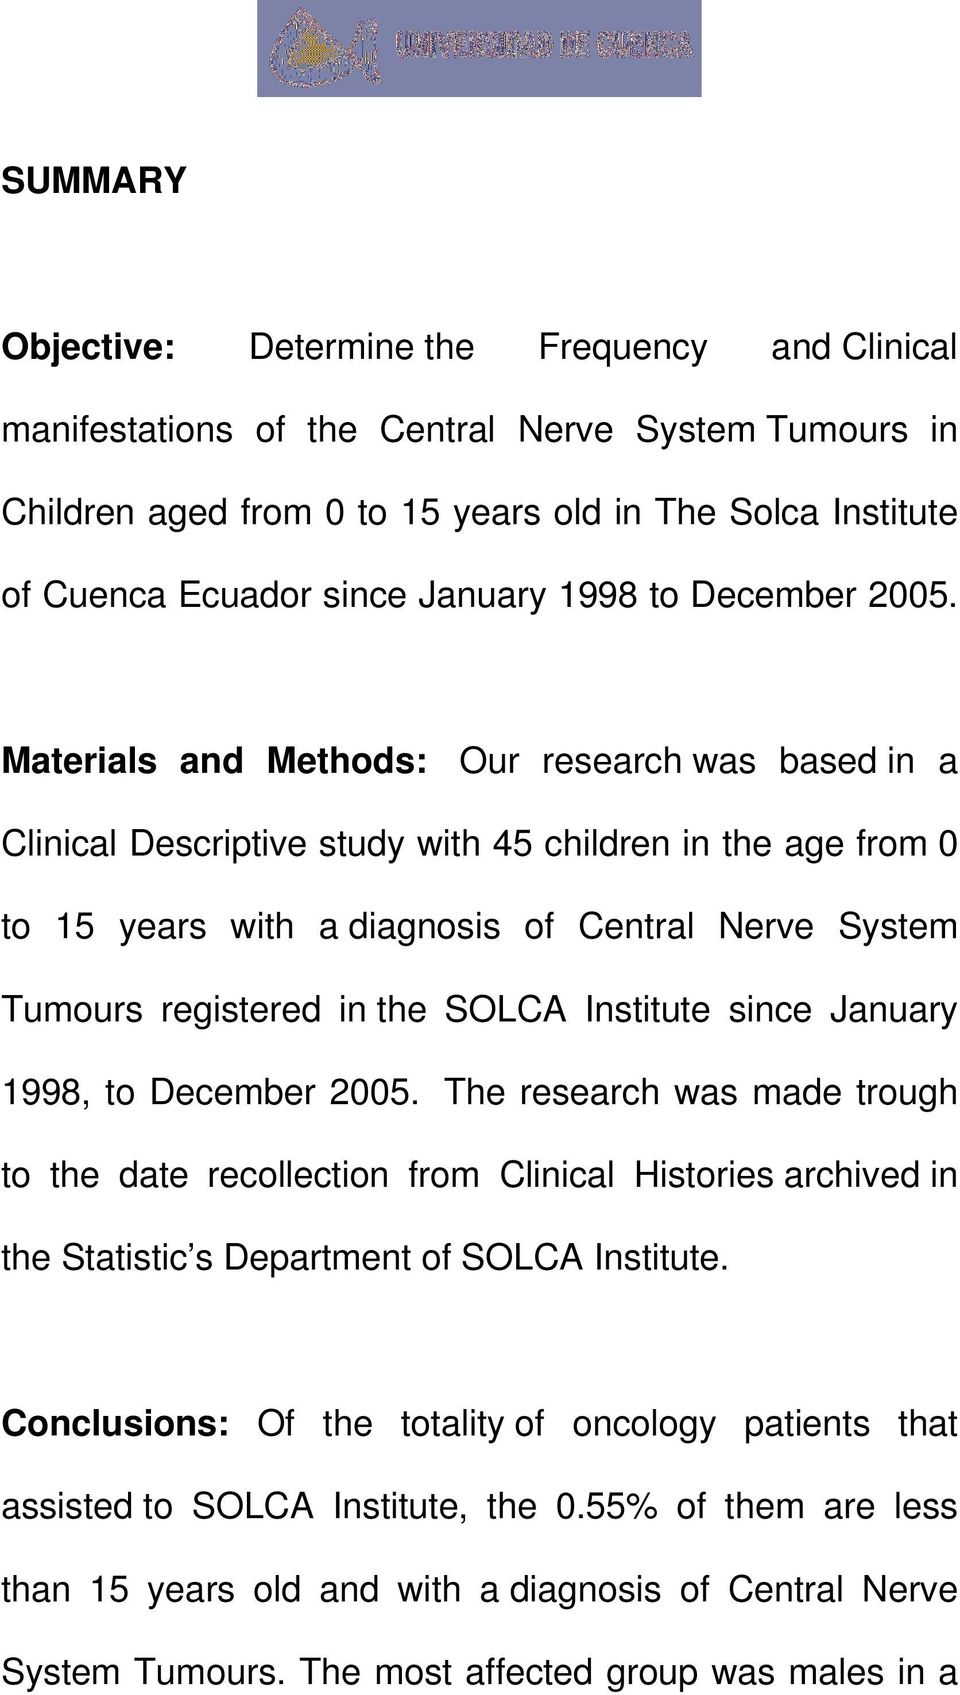 Materials and Methods: Our research was based in a Clinical Descriptive study with 45 children in the age from 0 to 15 years with a diagnosis of Central Nerve System Tumours registered in the SOLCA